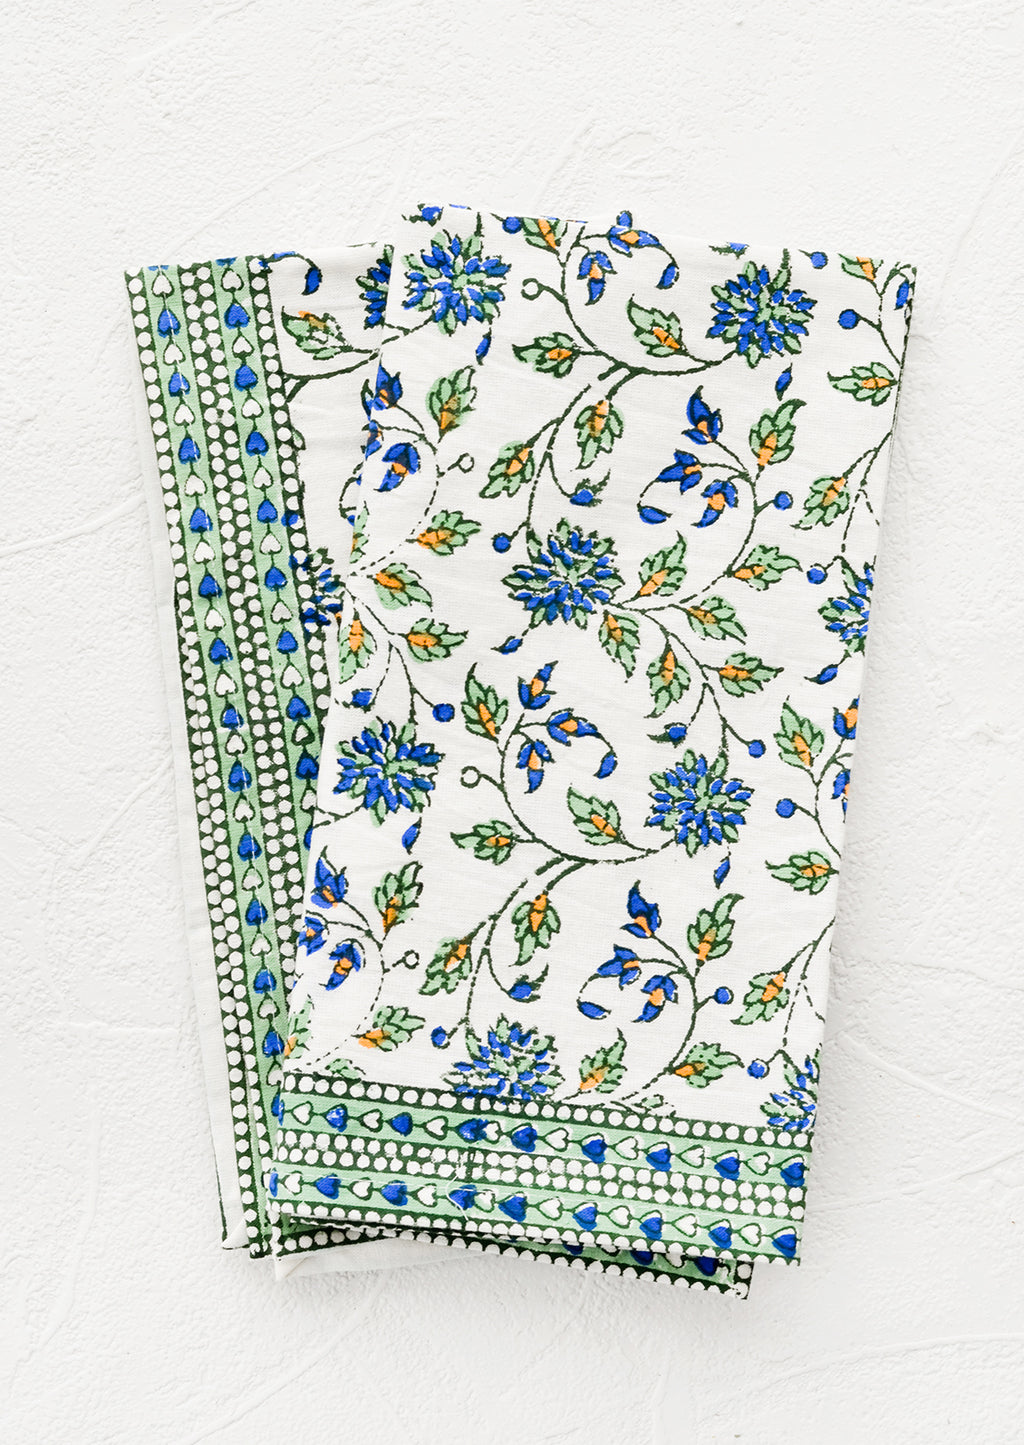 1: A pair of block printed floral napkins in green, blue and orange pattern.